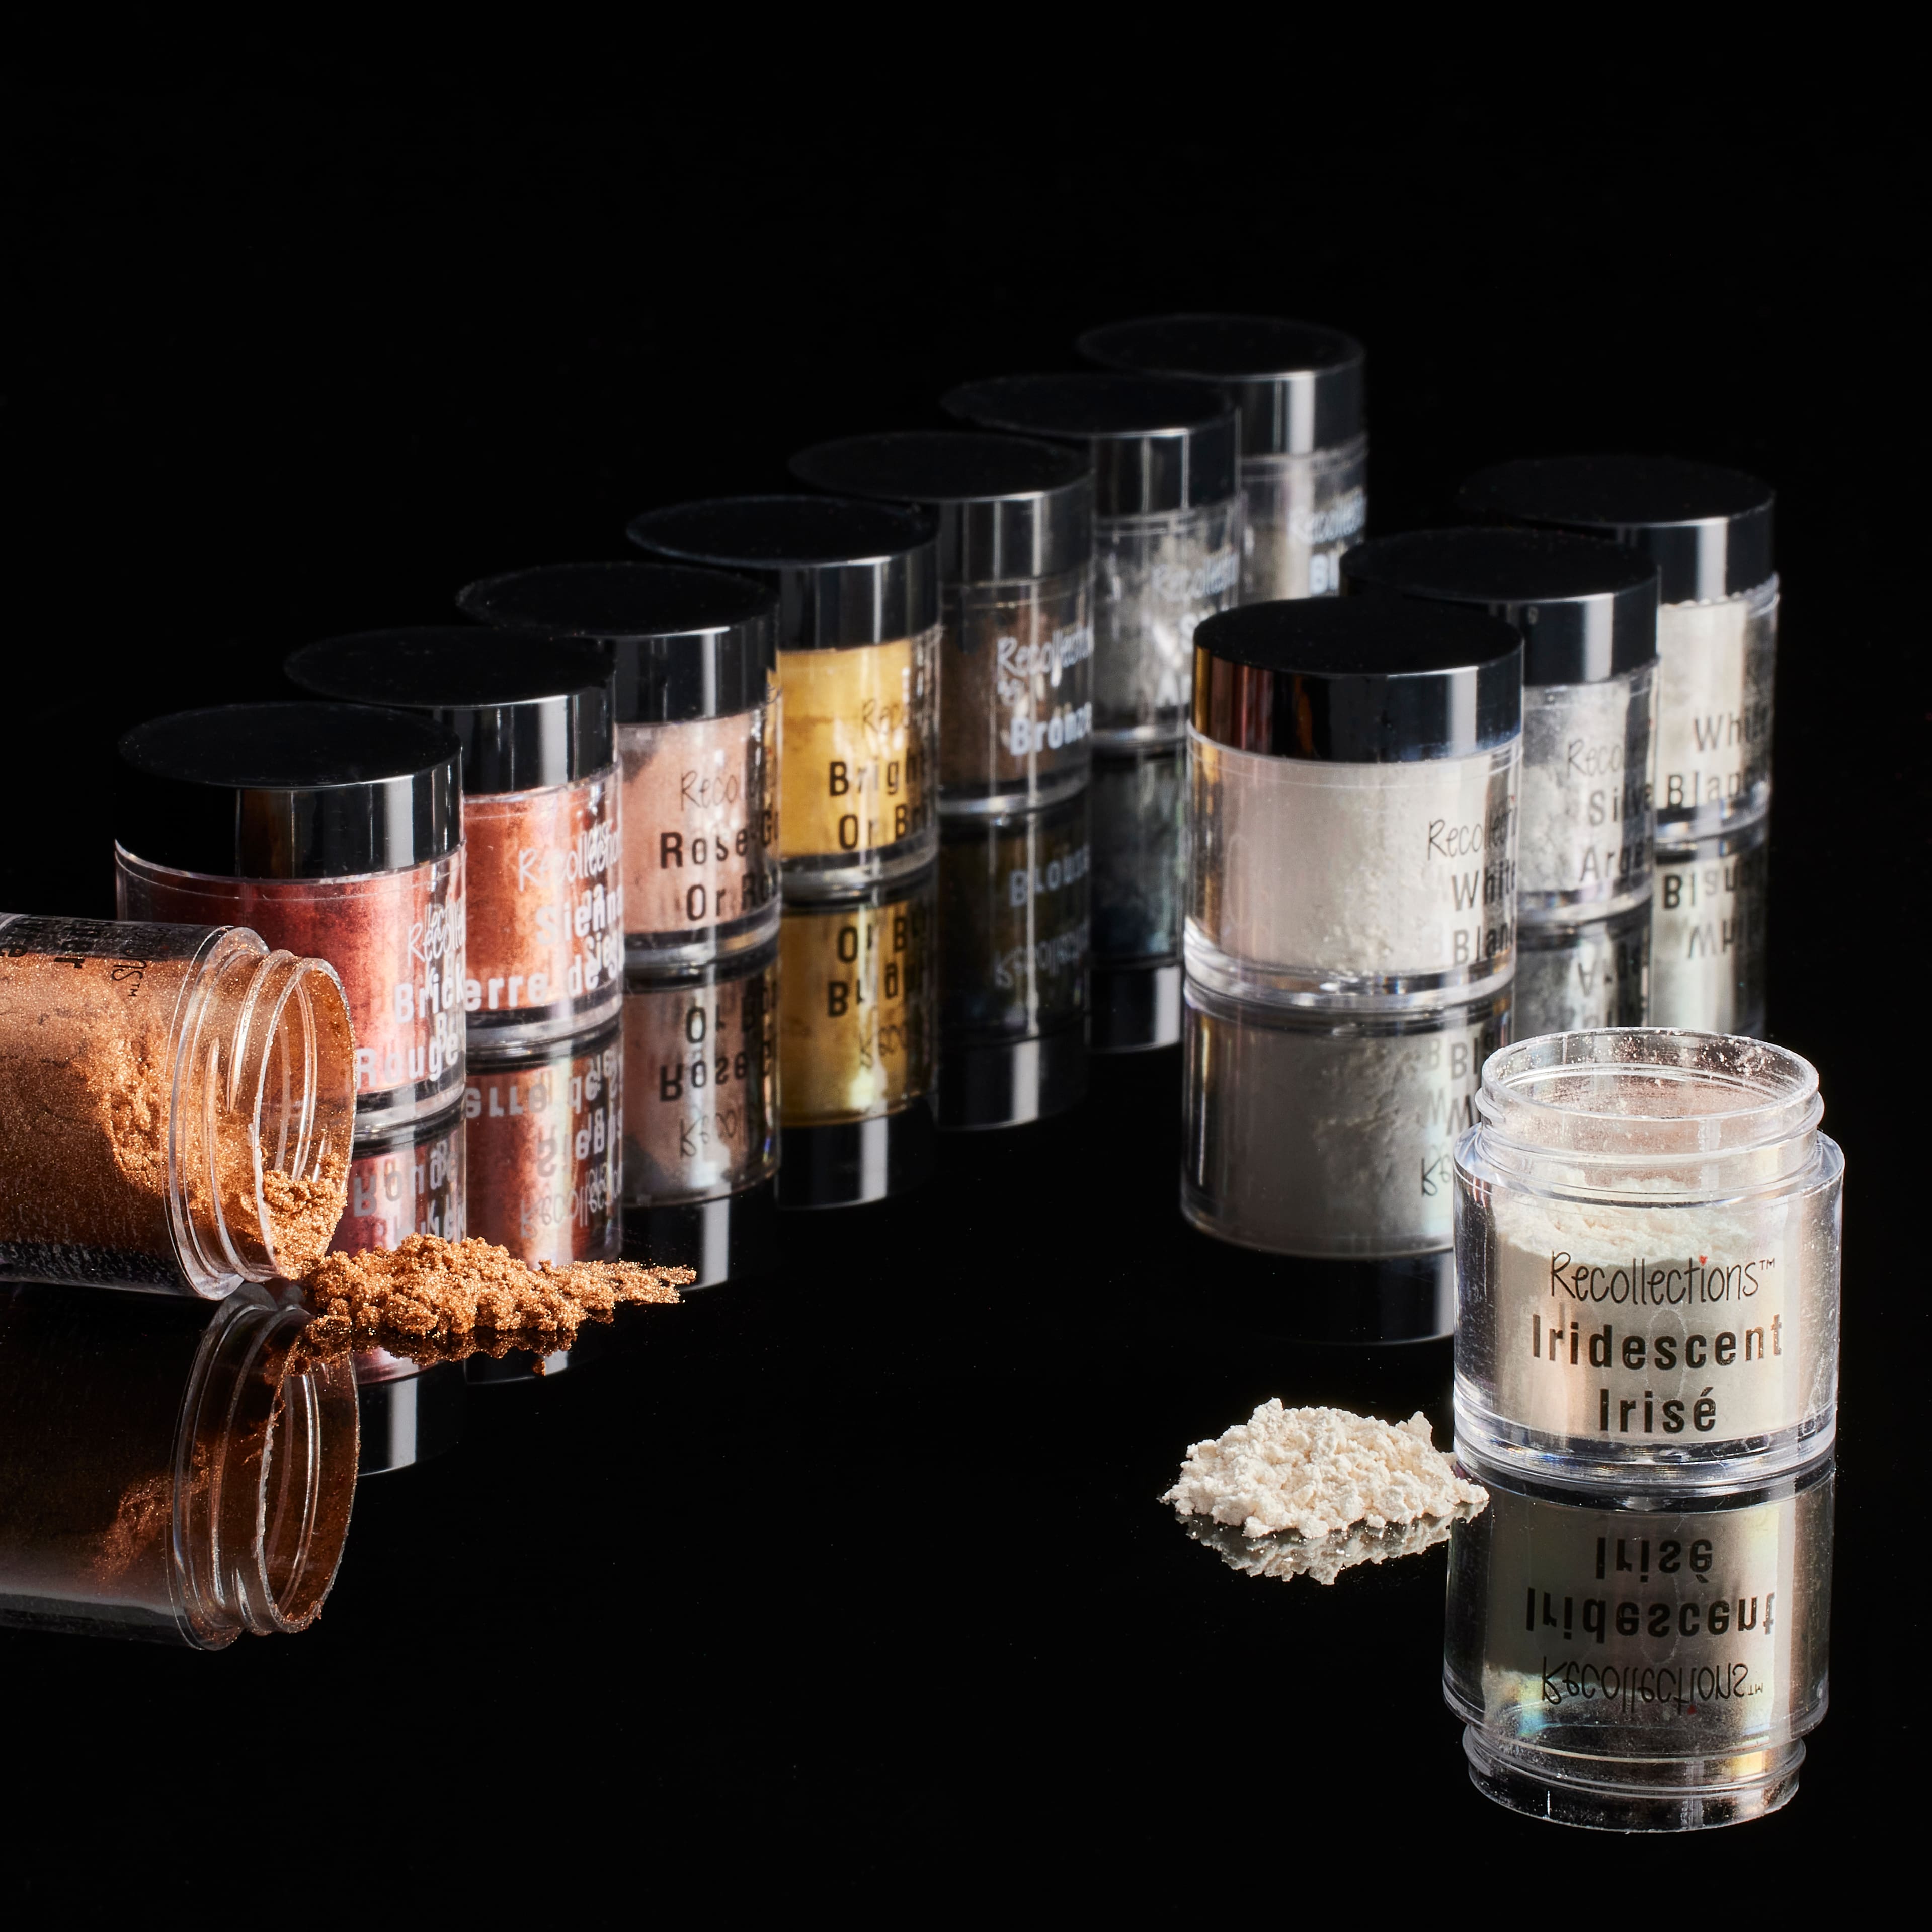 Metallic Pigment Powder Set by Recollections&#x2122;